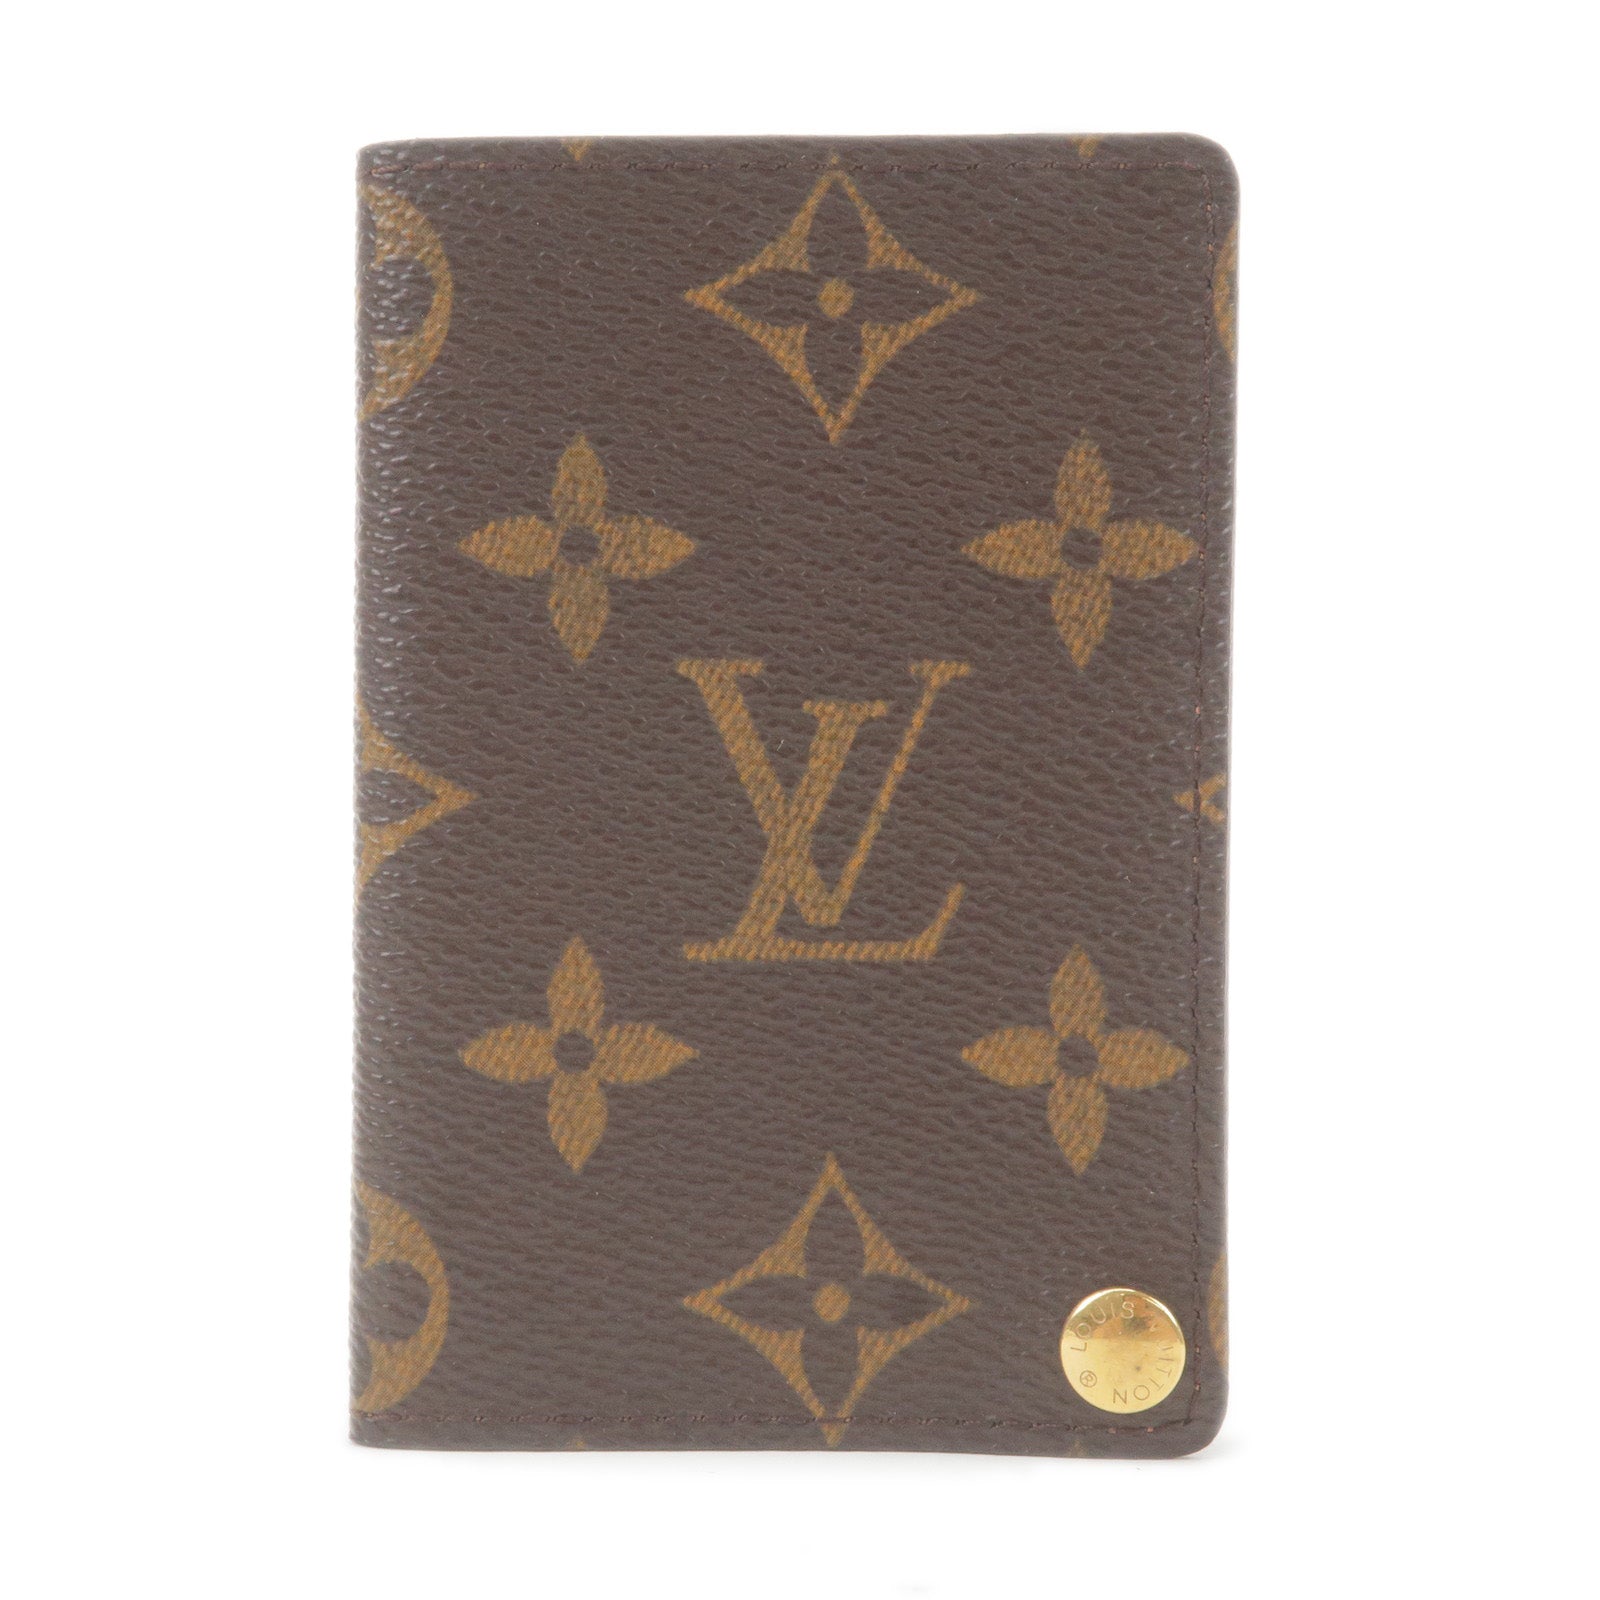 Pre-owned Louis Vuitton Dog Bag Charm And Key Holder Monogram Brown